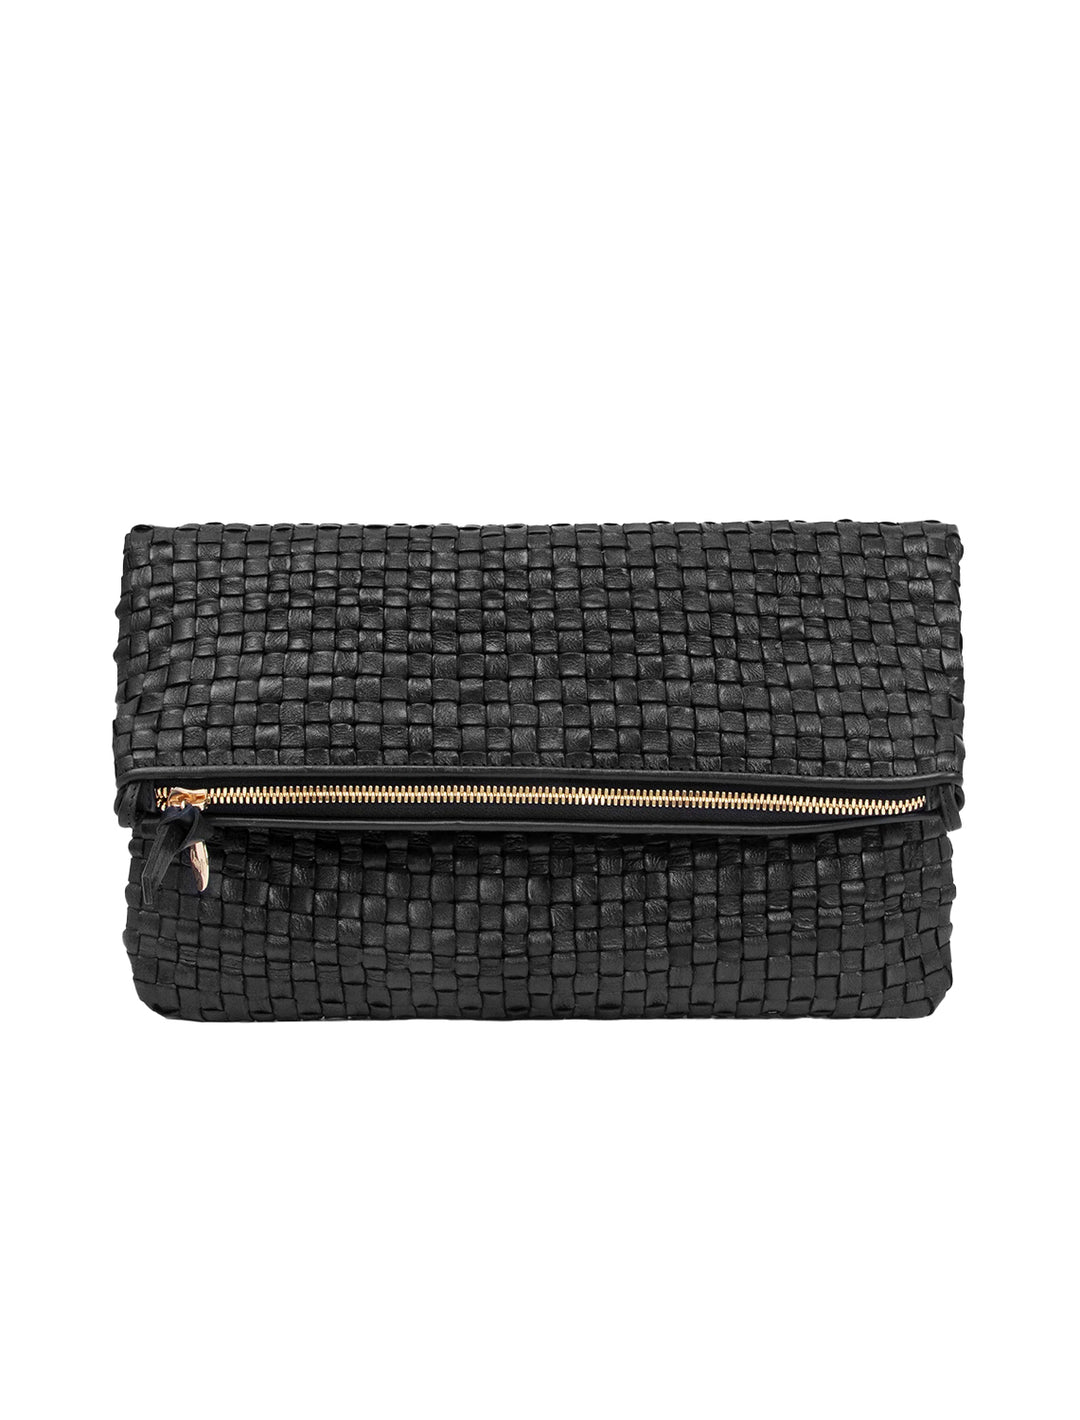 Clare V. Woven Checker Foldover Clutch w/ Tabs in Black - Bliss Boutiques